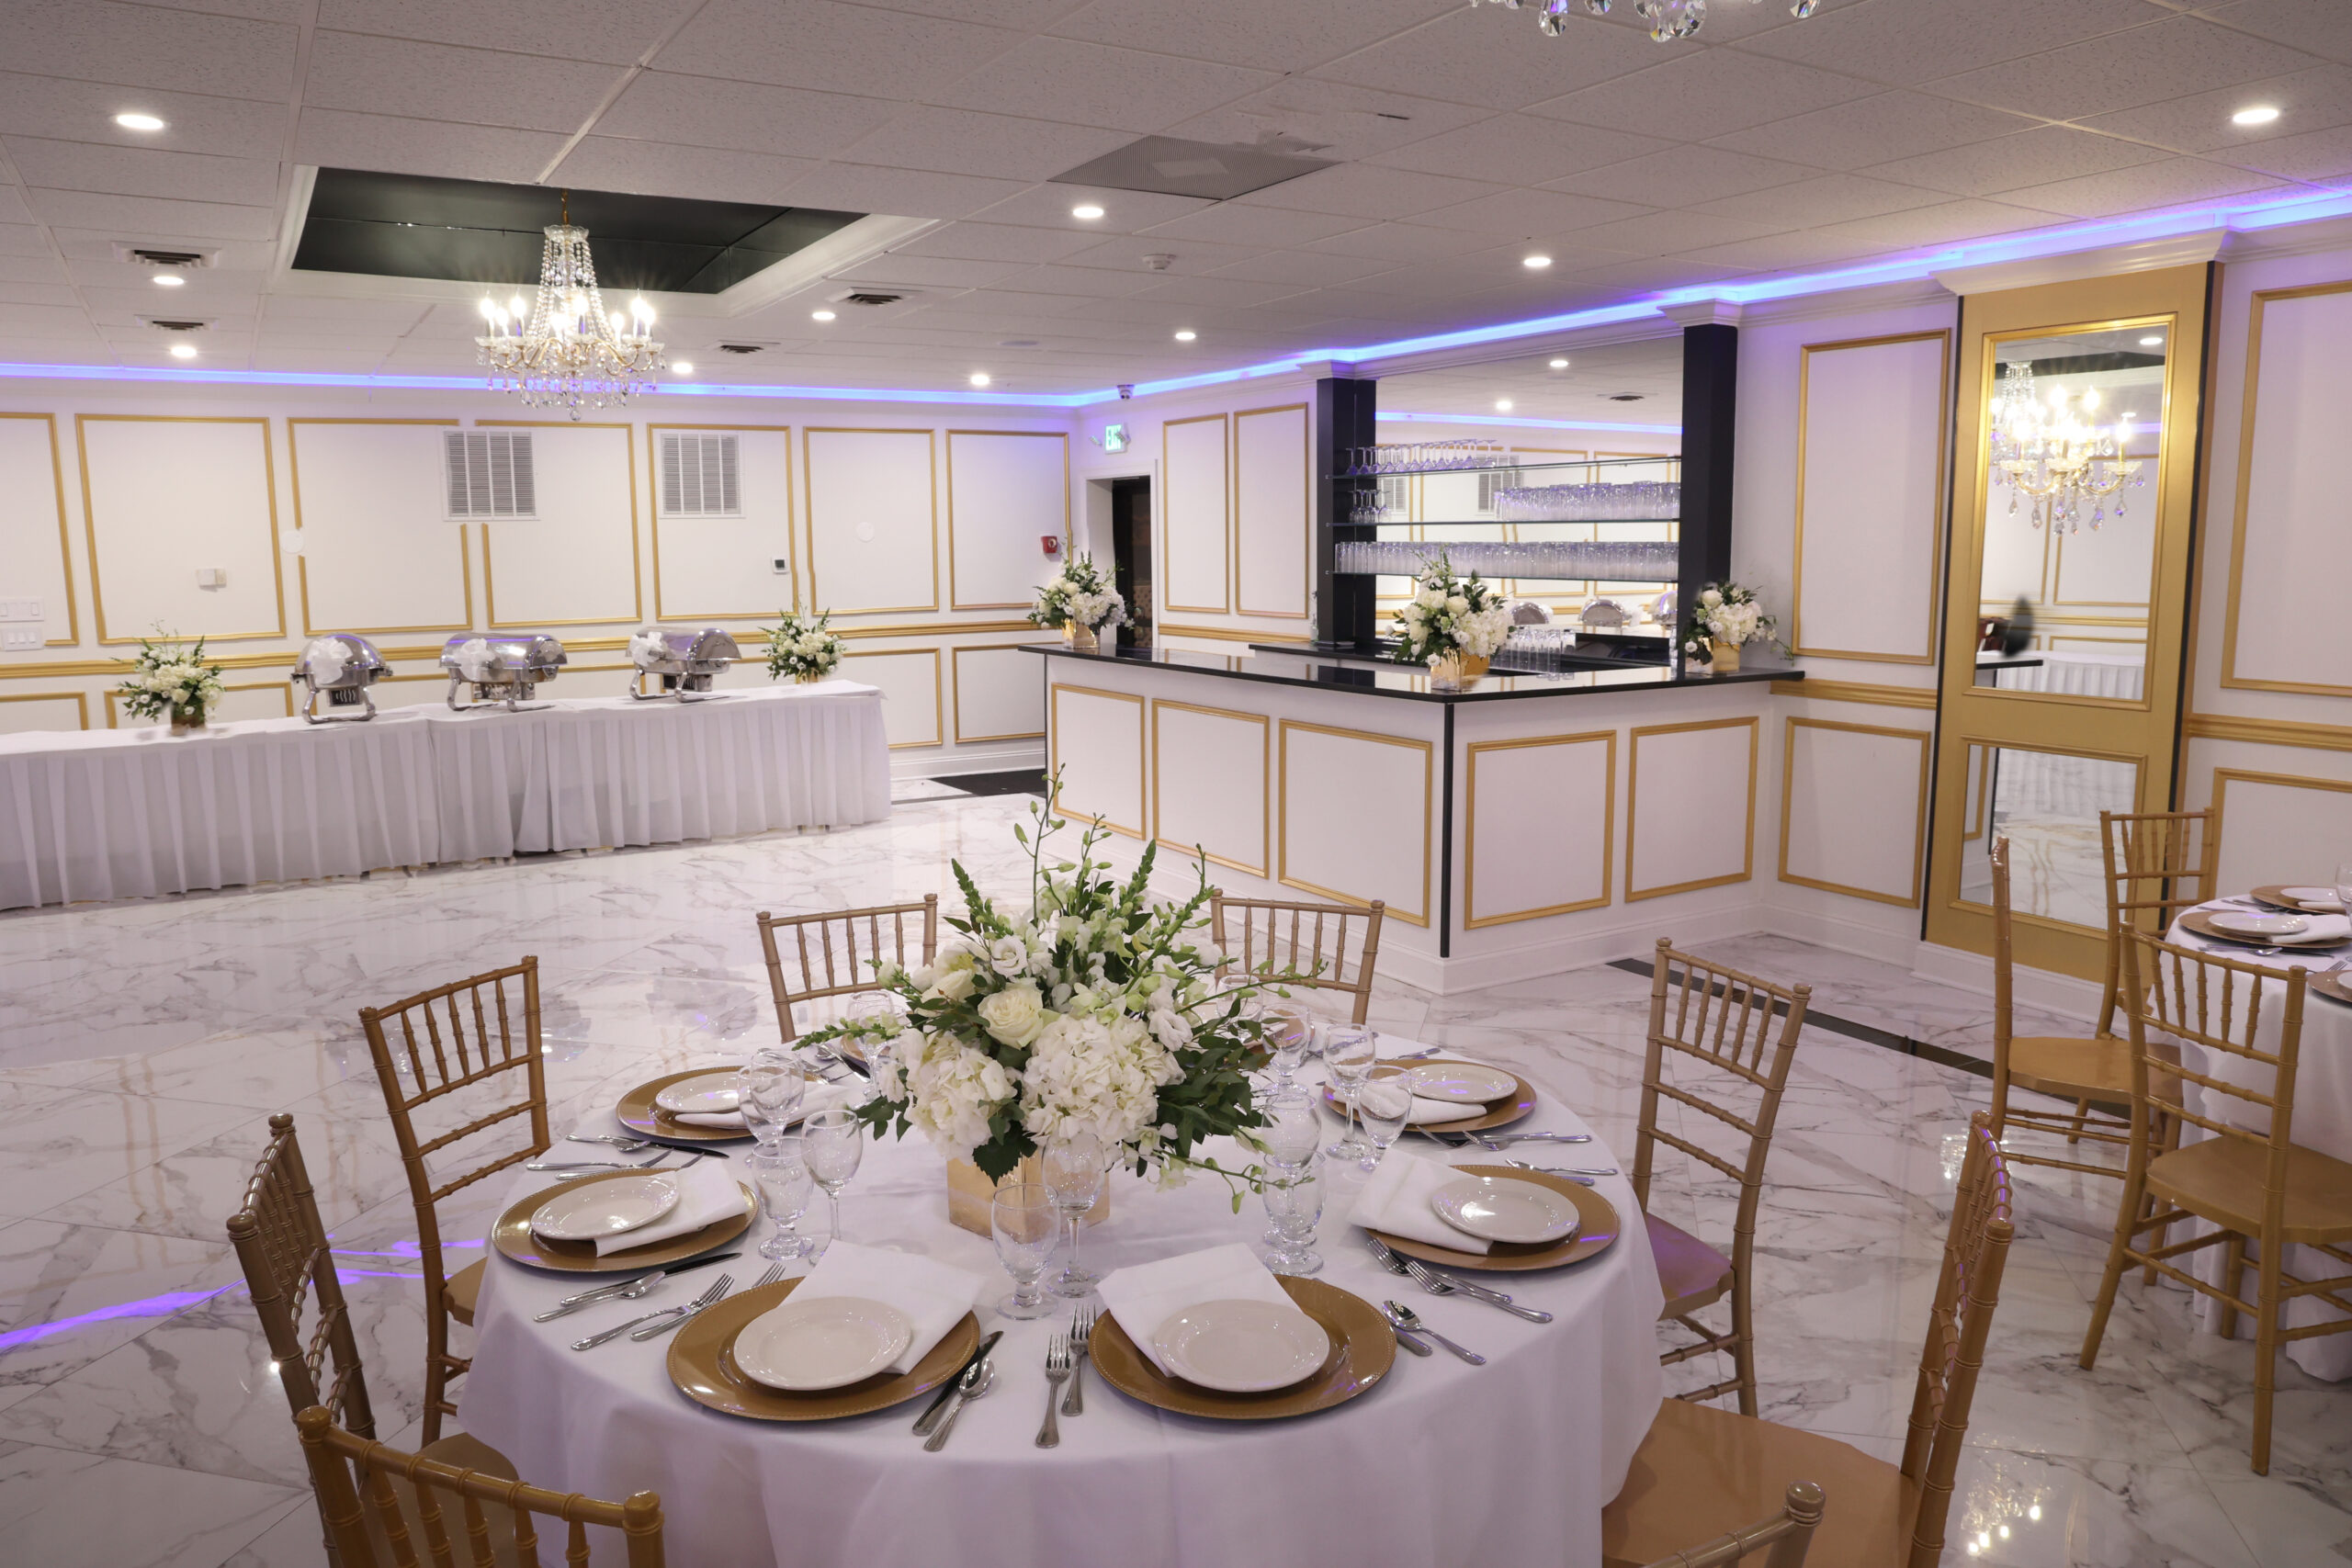 Inside the Gran Centurions, a wedding venue in New Jersey.